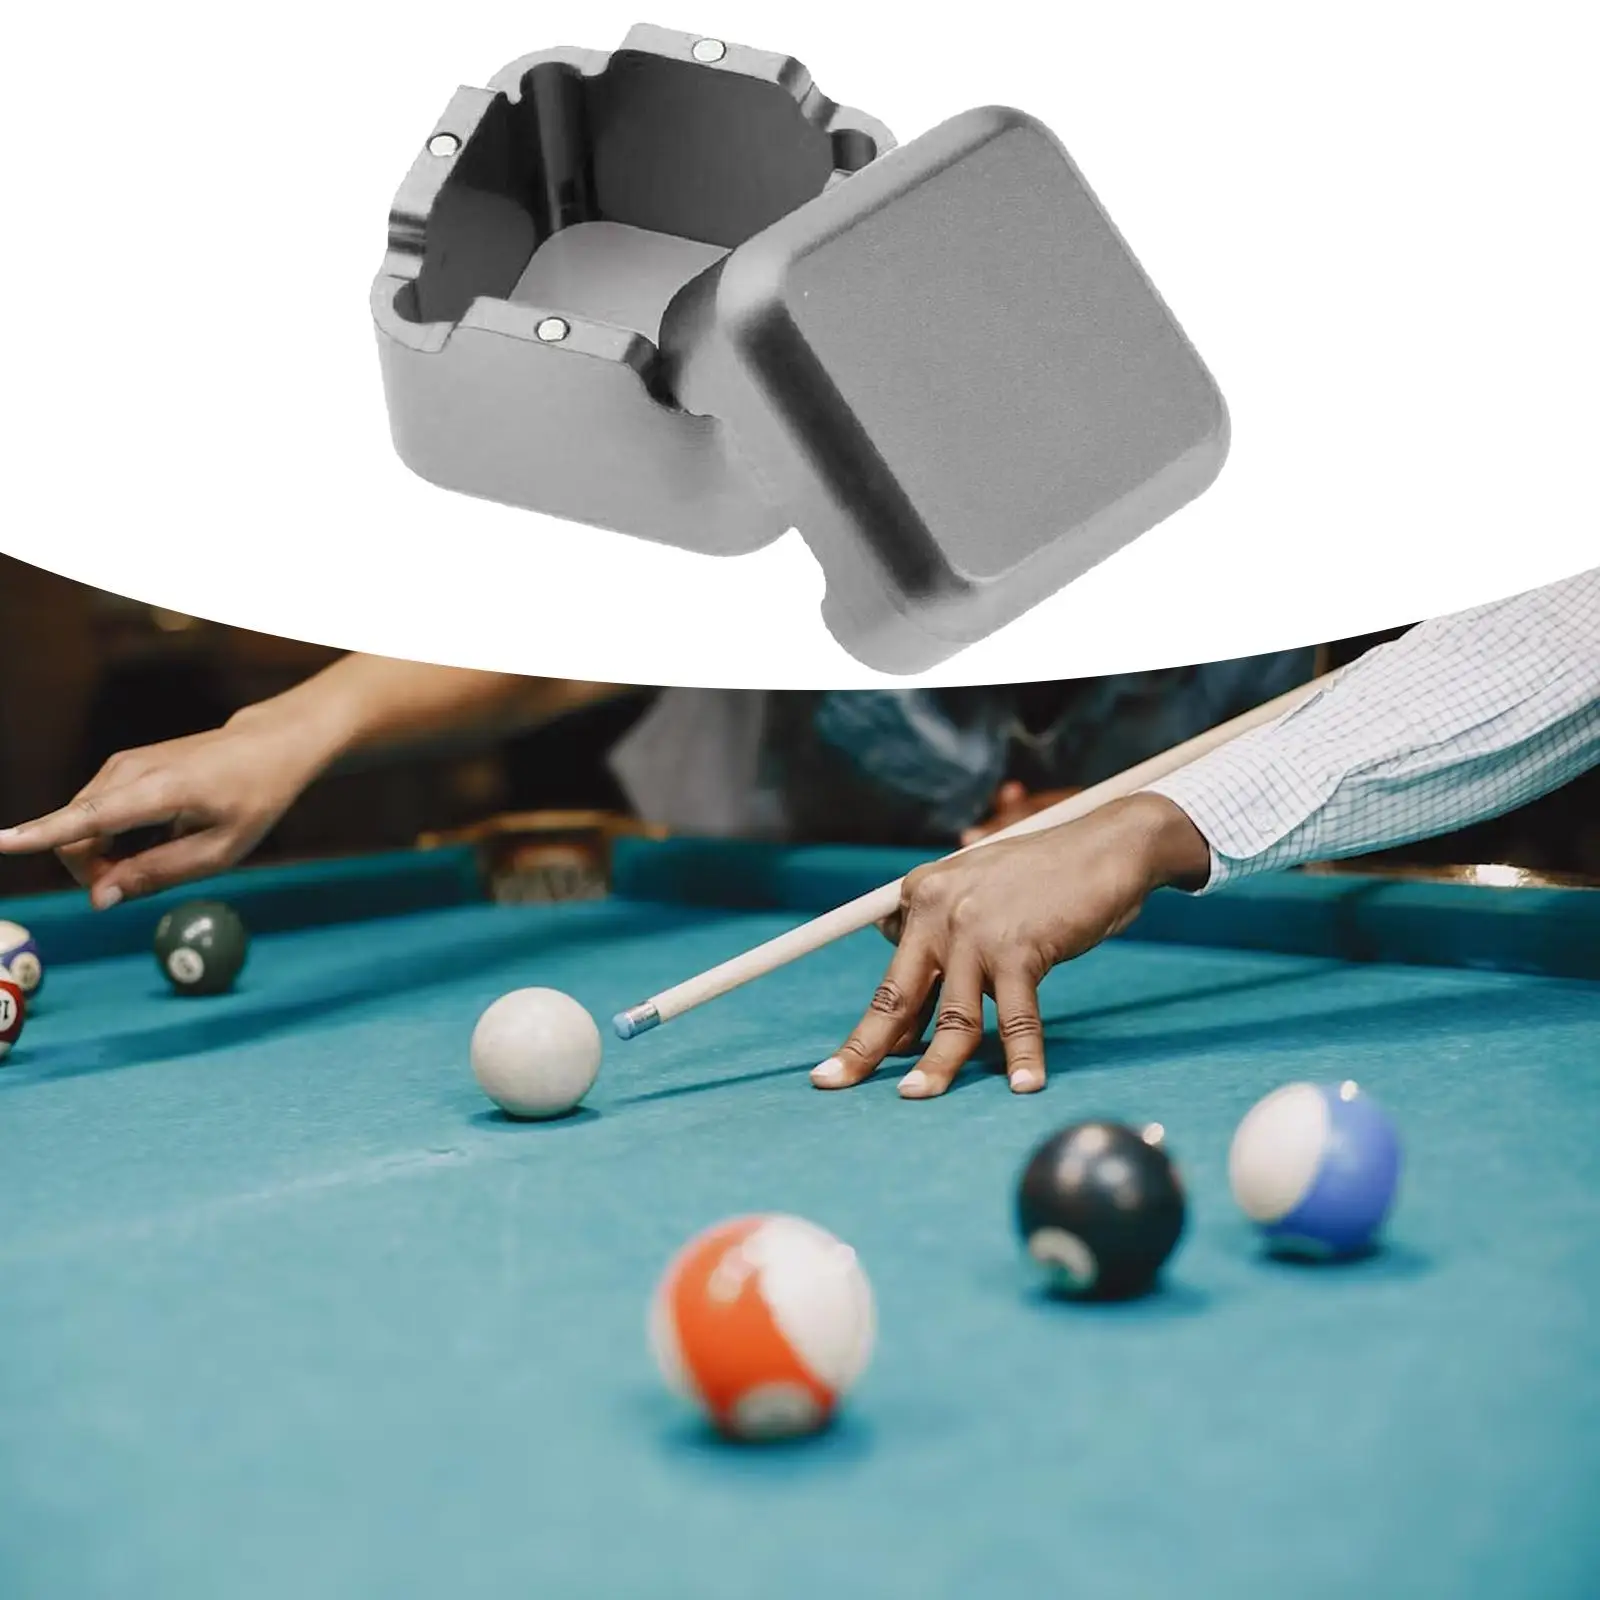 Billiard Pool Chalk Cup Holders Square for Pocket Chalkers Billiards Players Violet